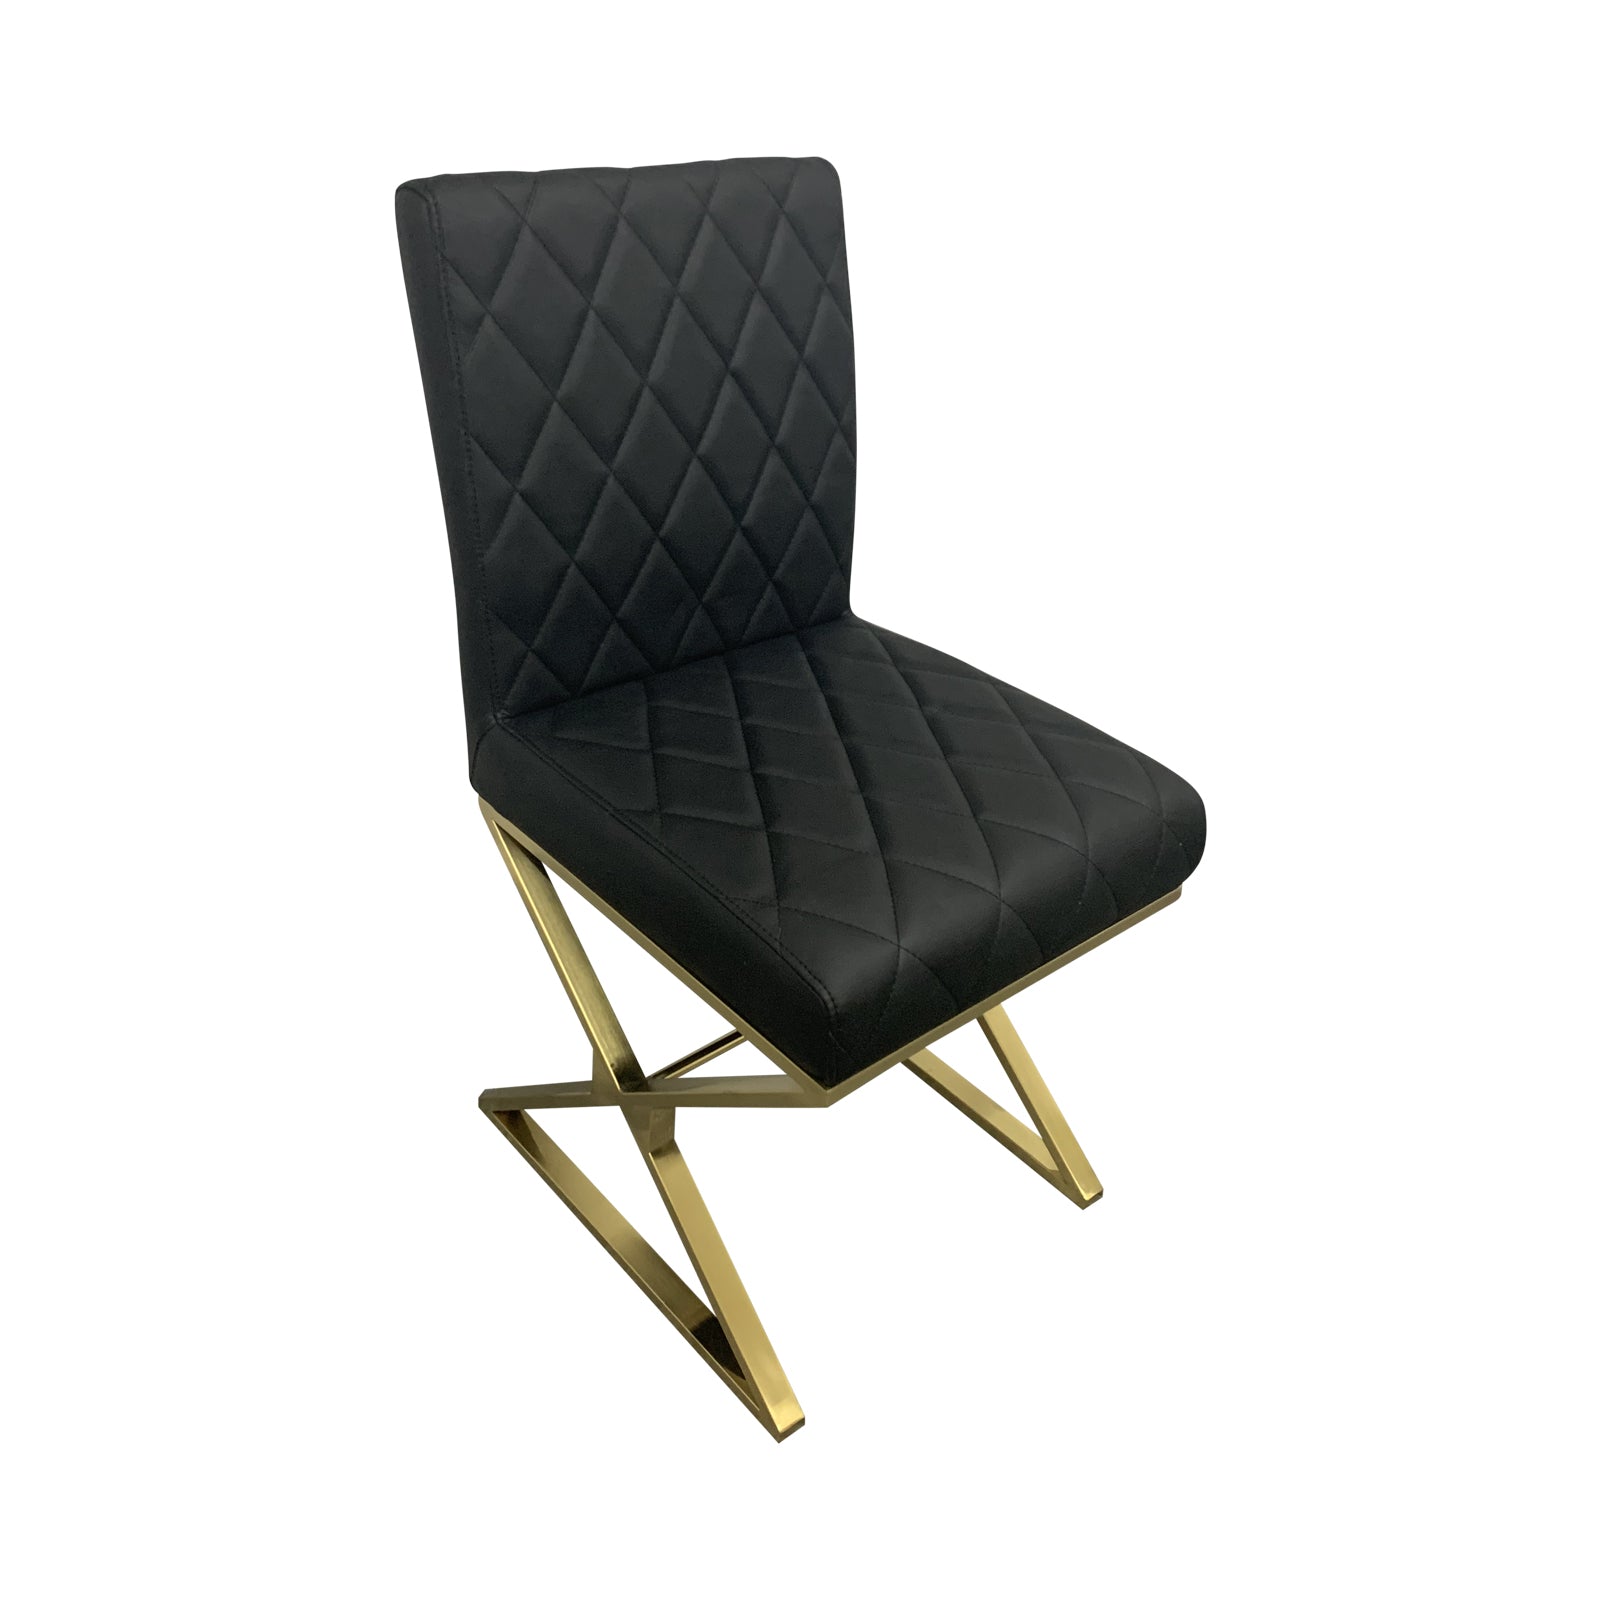 2X Dining Chair Stainless Gold Frame & Seat Black PU Leather - ozily